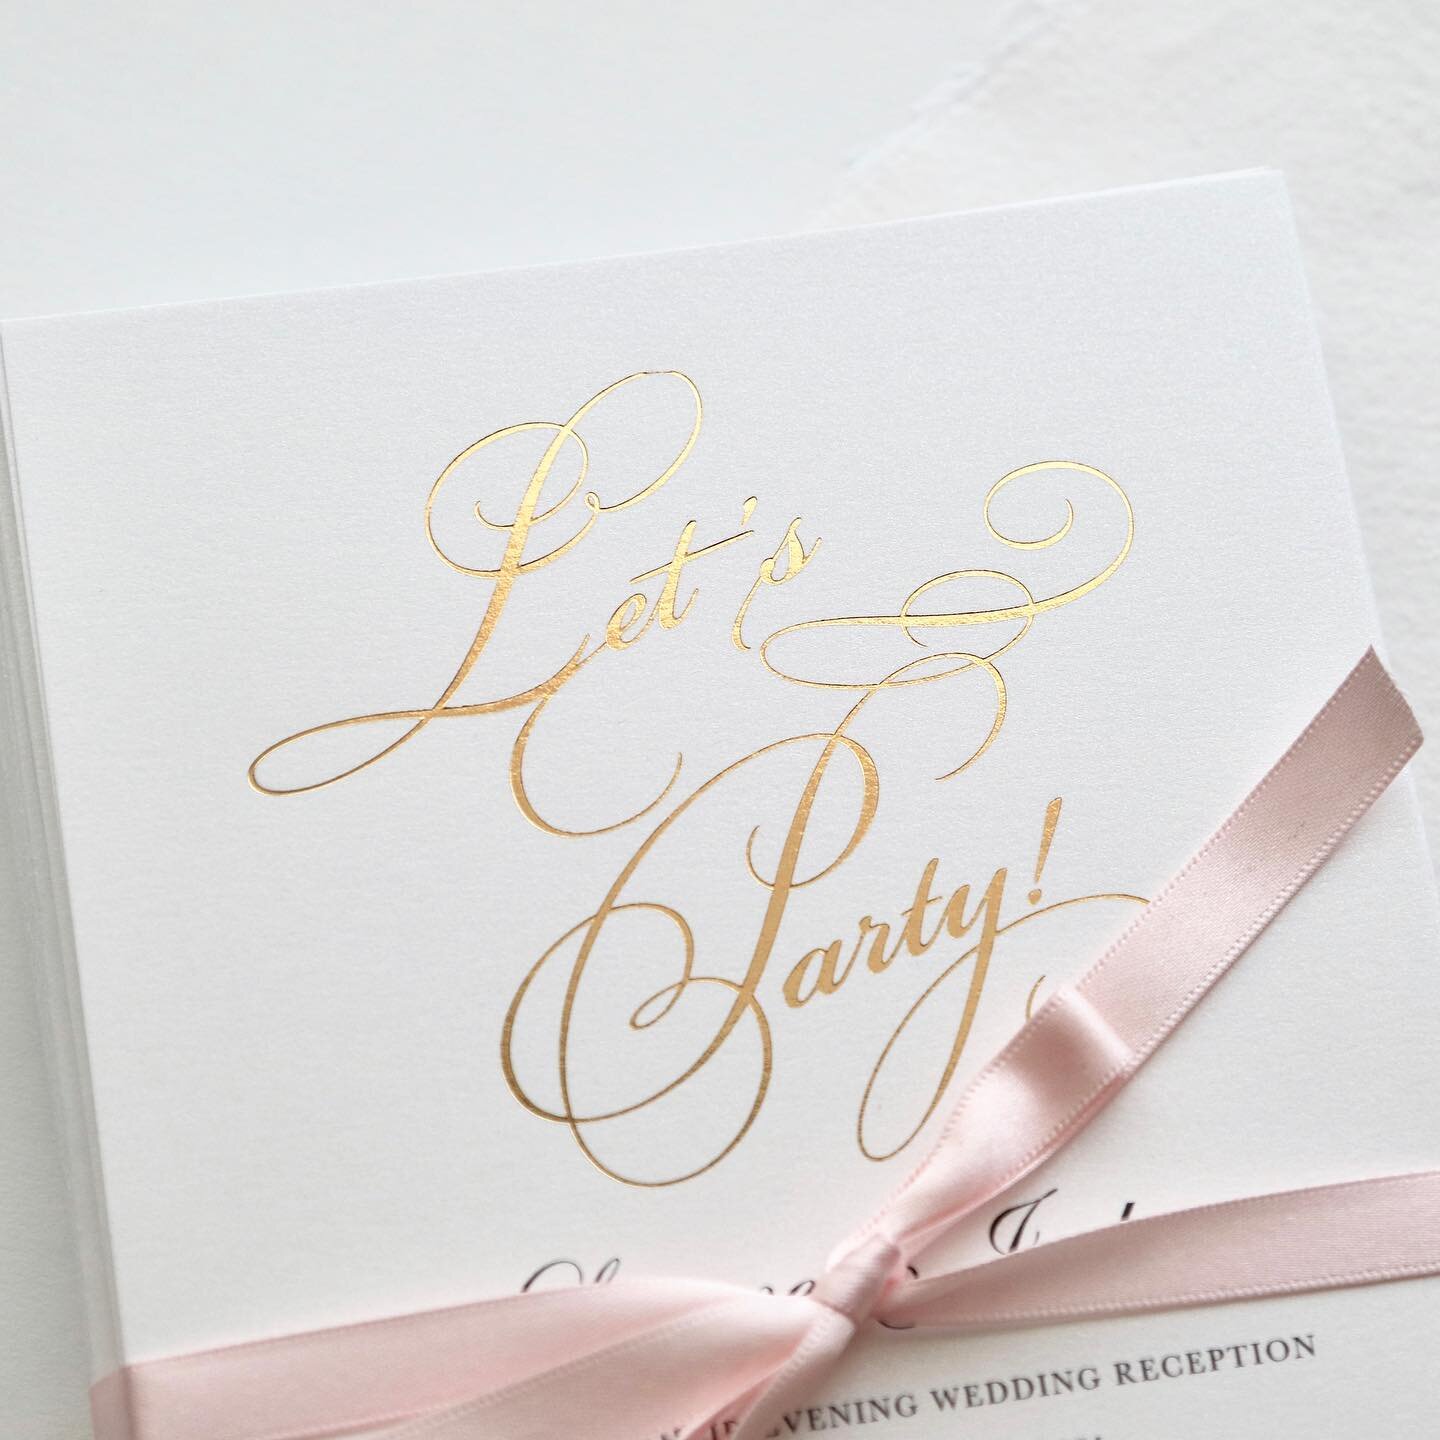 Evening reception invitations &hellip; add some glitz and get your guests in the mood to P.A.R.T.Y

#goldfoil #foiledinvites #goldfoilstationery #weddingstationery #goldstationery #goldwedding #letsparty #eveninginvitations #eveninginvites #weddingsu